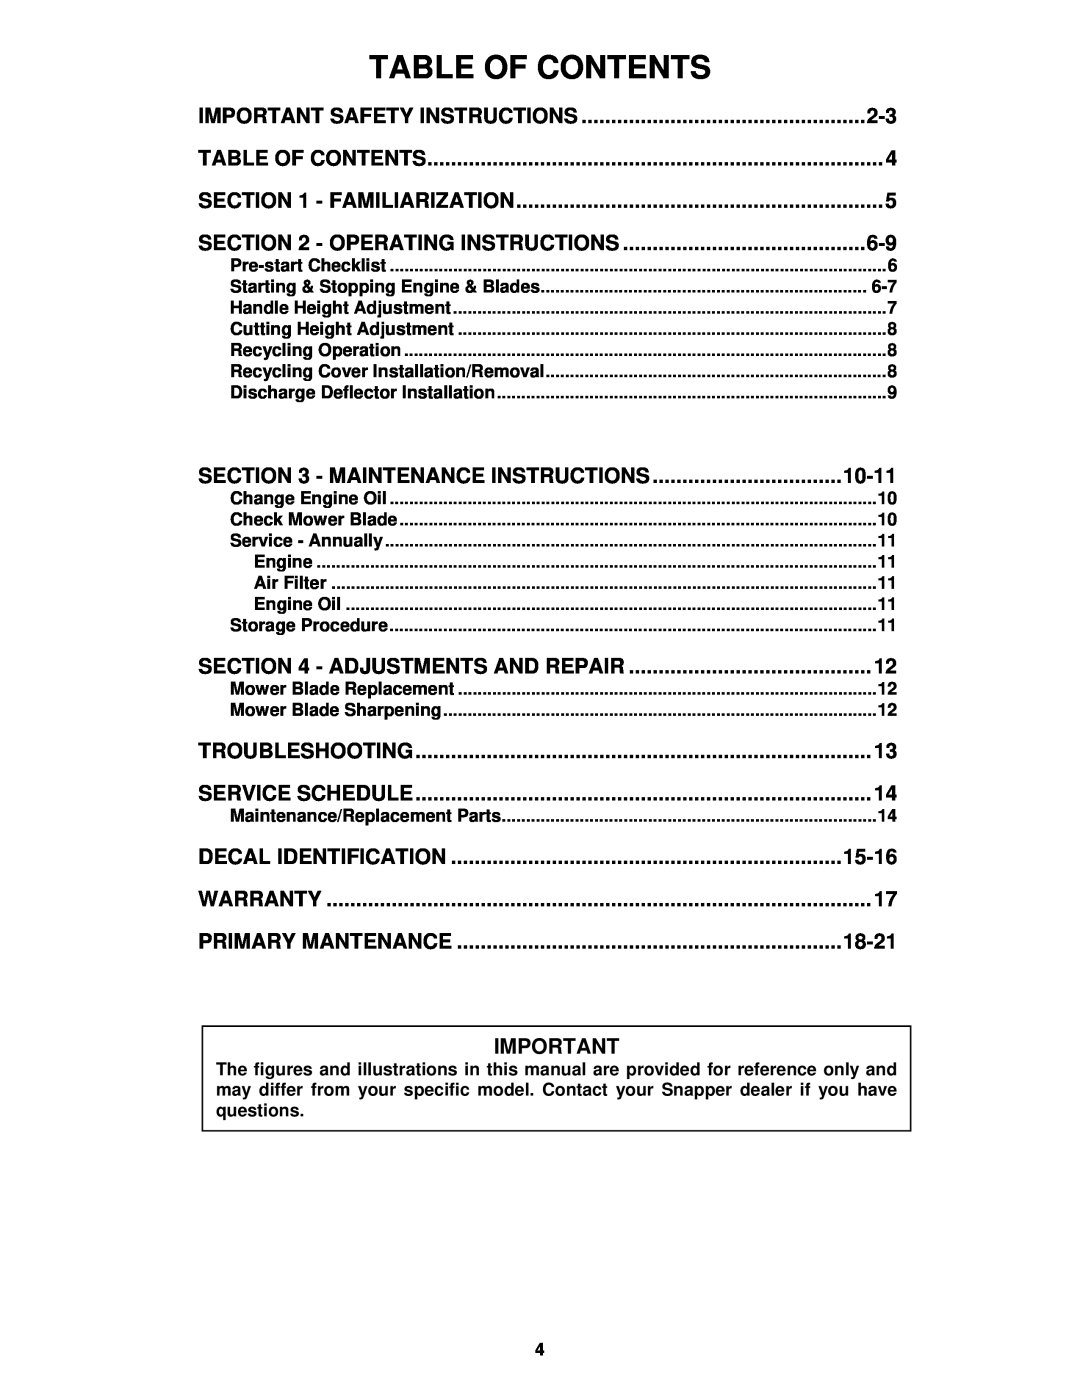 Snapper ER195517B important safety instructions Table Of Contents 